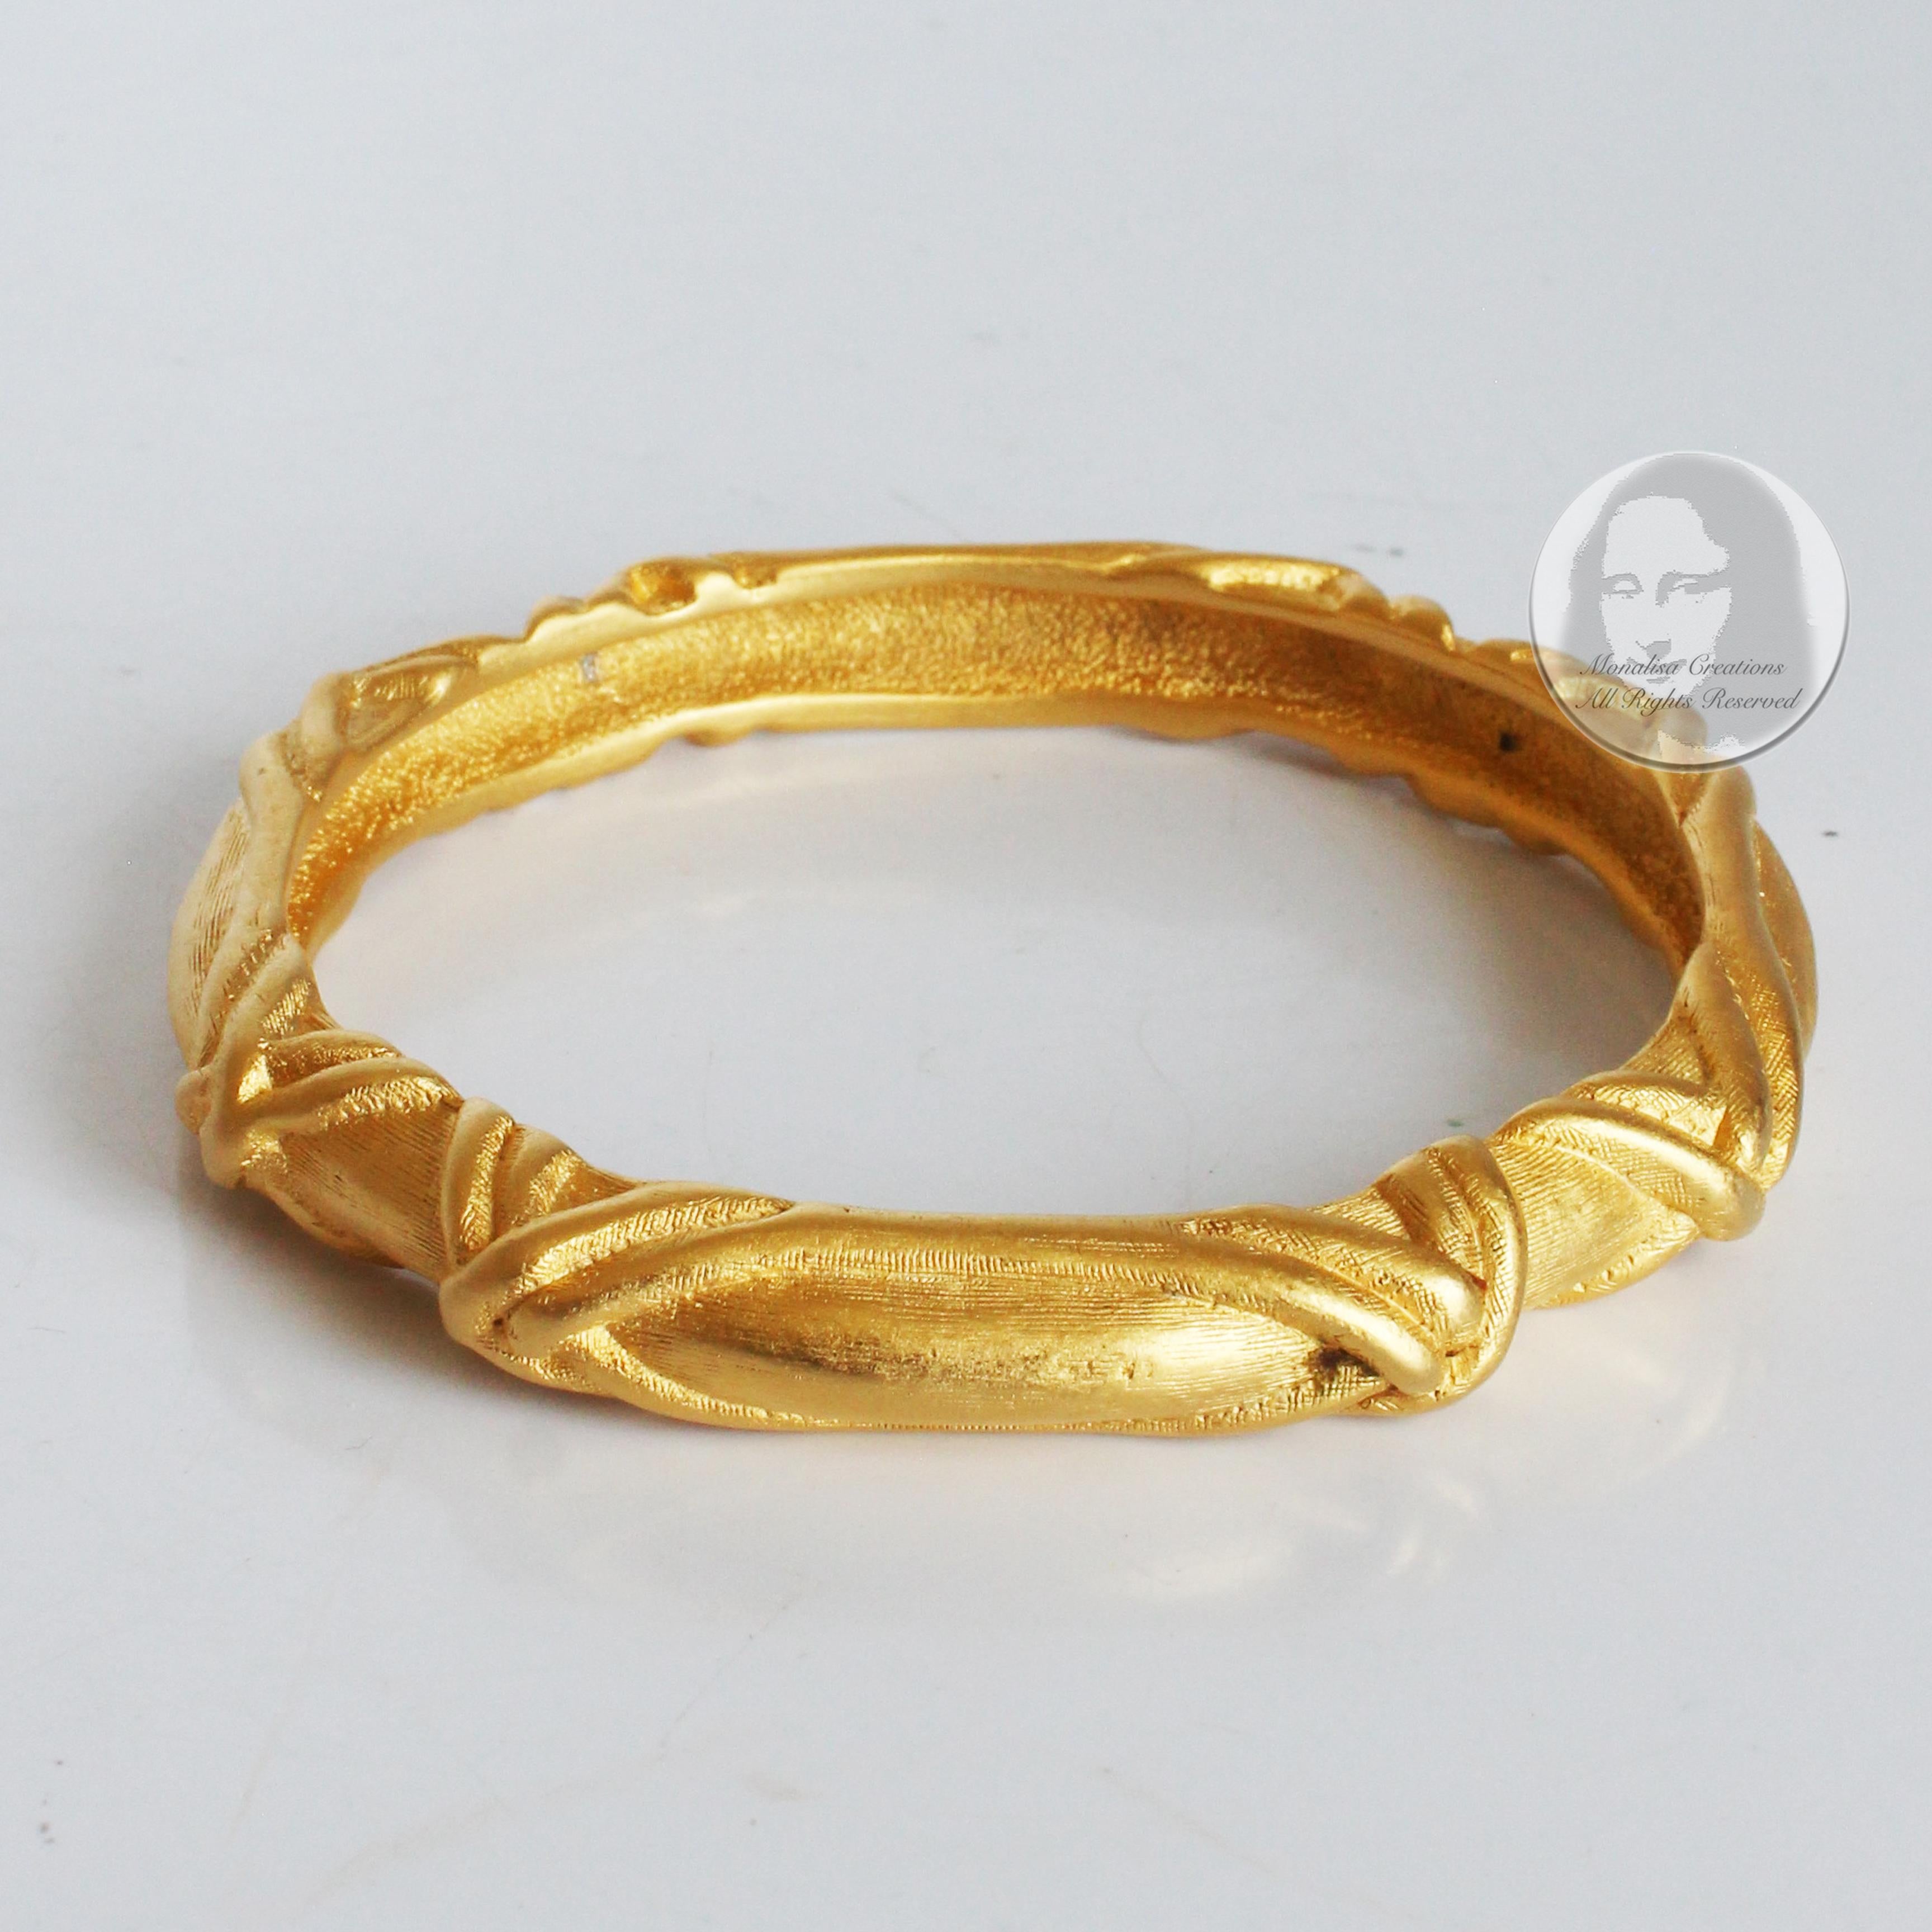 Givenchy Bracelet Bangle Gold Metal Textured Abstract Vintage 80s Jewelry  For Sale 2